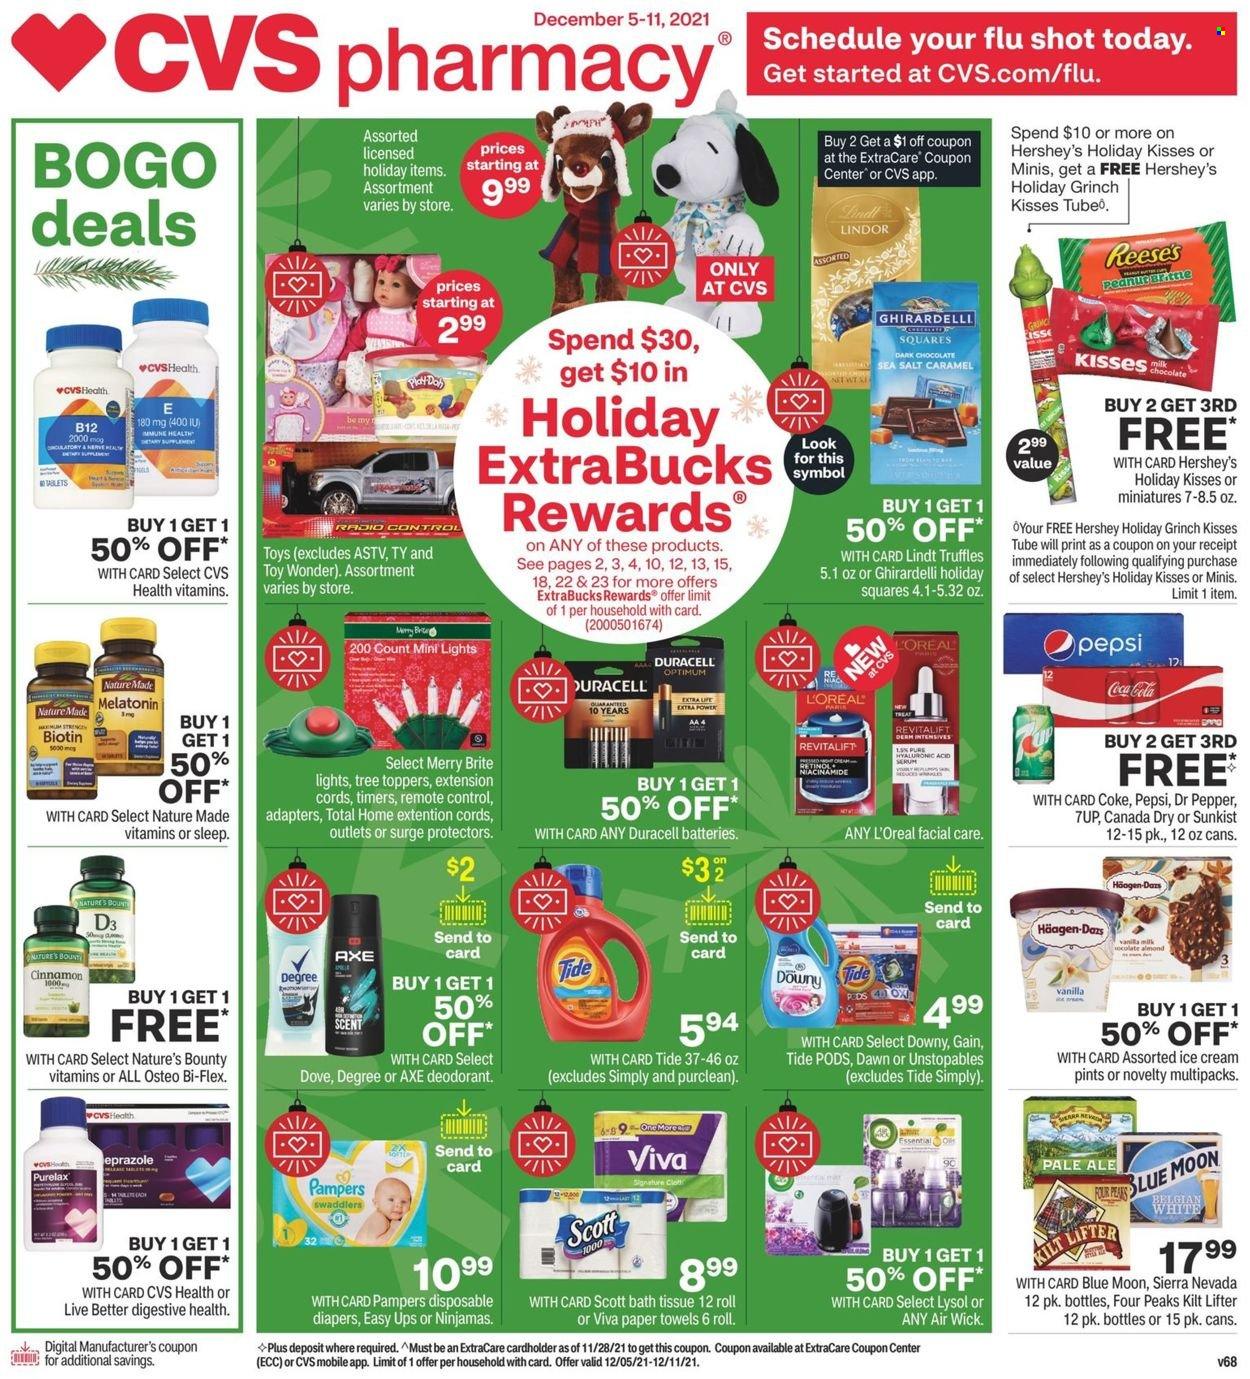 thumbnail - CVS Pharmacy Flyer - 12/05/2021 - 12/11/2021 - Sales products - ice cream, Reese's, Hershey's, Häagen-Dazs, Lindt, Lindor, truffles, dark chocolate, Ghirardelli, Canada Dry, Coca-Cola, Pepsi, Dr. Pepper, 7UP, Pampers, nappies, Dove, bath tissue, Scott, kitchen towels, paper towels, Gain, Lysol, Tide, Unstopables, Purelax, L’Oréal, Brite, anti-perspirant, deodorant, Air Wick, battery, Duracell, Optimum, toys, Biotin, Nature Made, Nature's Bounty, Osteo bi-flex, Bi-Flex, vitamin D3, beer, Blue Moon. Page 1.